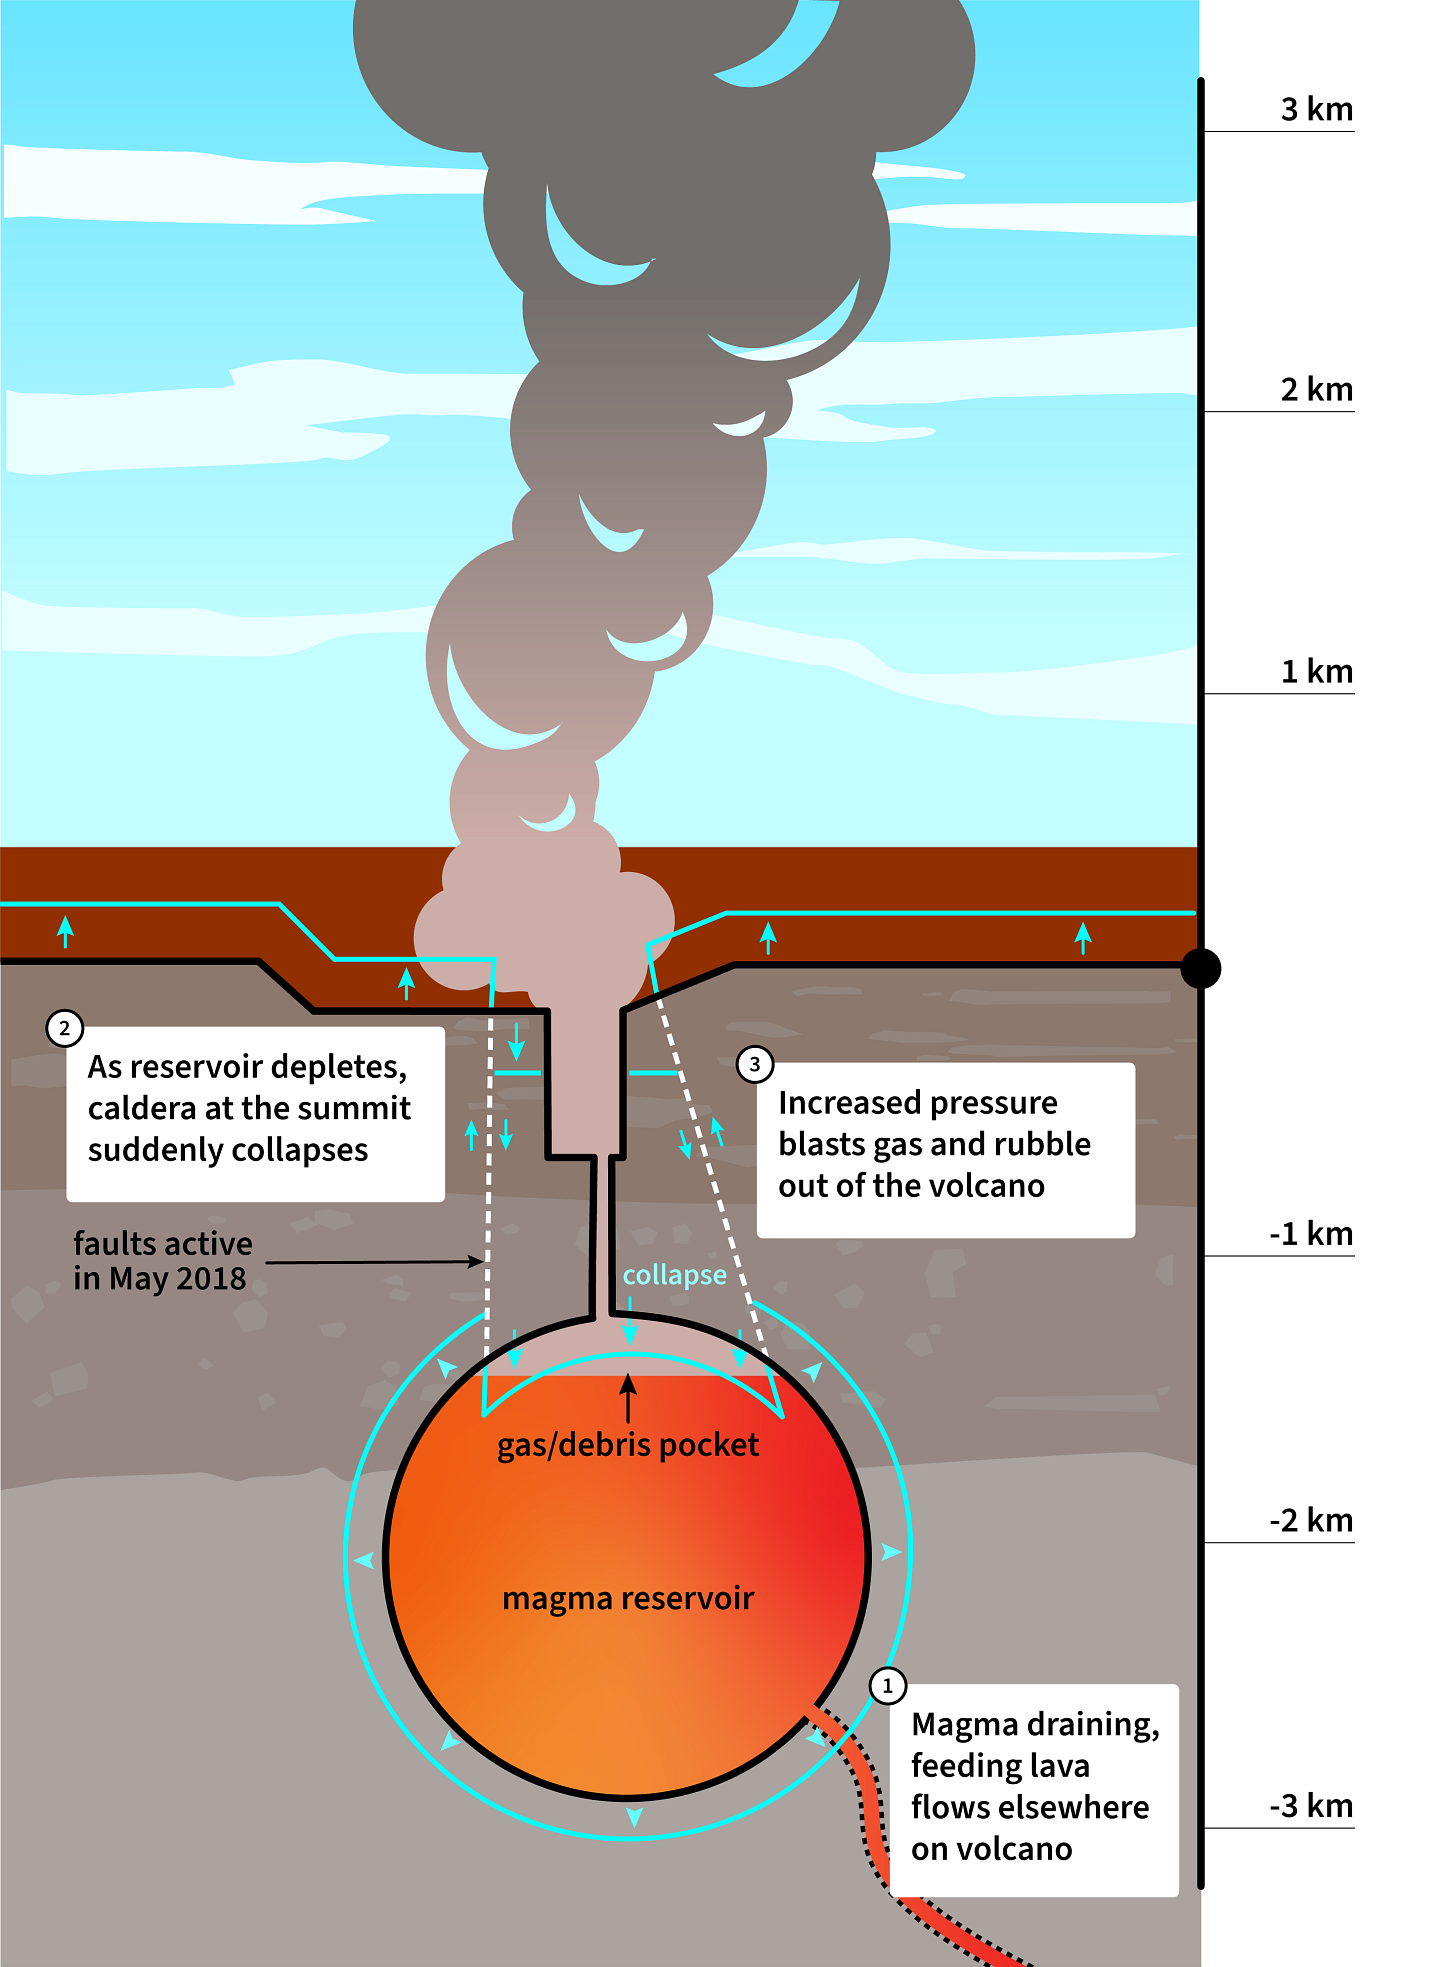 Illustration showing the smoke erupting from an underground magma chamber showing the fault lines for faults active in May 2018 and its collapse with the following process: 1. Magma draining, feeding lava flows elsewhere on volcano. 2. As reservoir depletes, caldera at the summit suddenly collapses 3. Increased pressure blasts gas and rubble our of the volcano. 